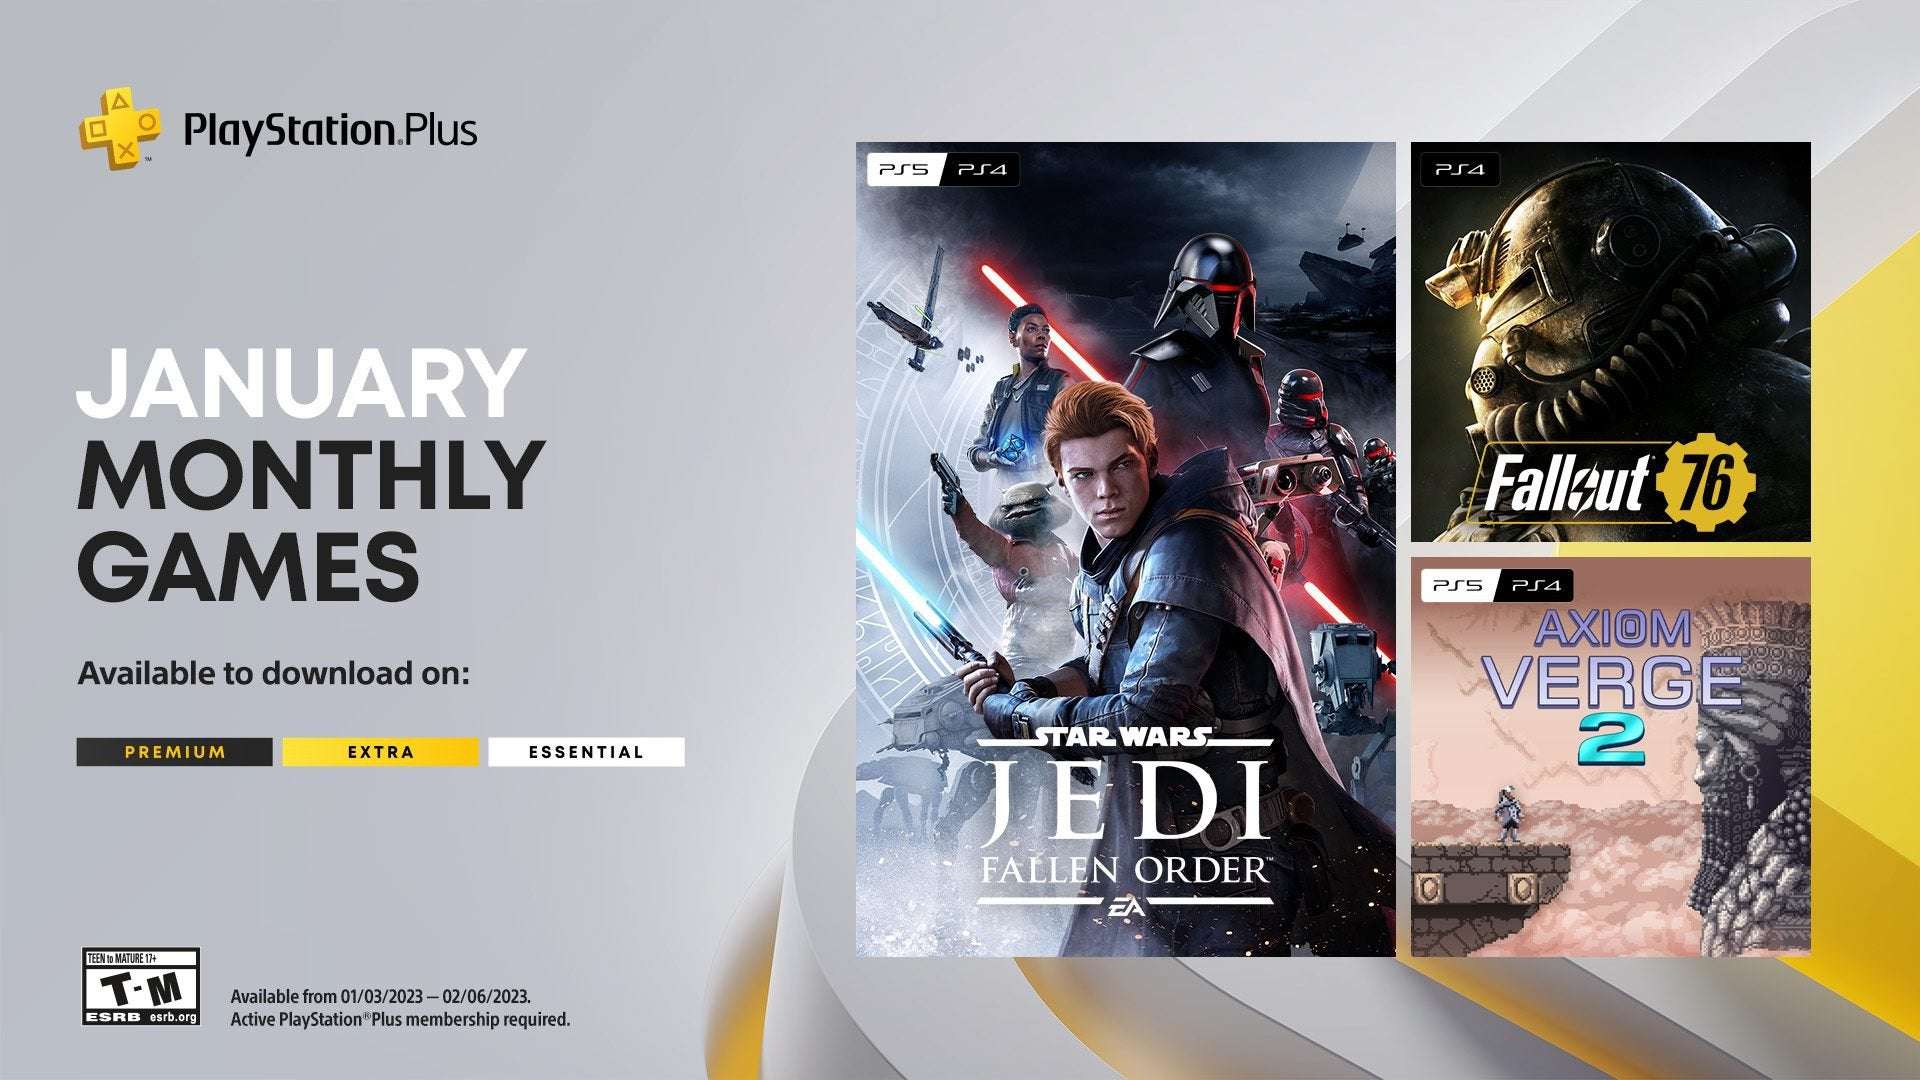 image for PlayStation Plus Monthly Games for January: Star Wars Jedi: Fallen Order, Fallout 76, Axiom Verge 2